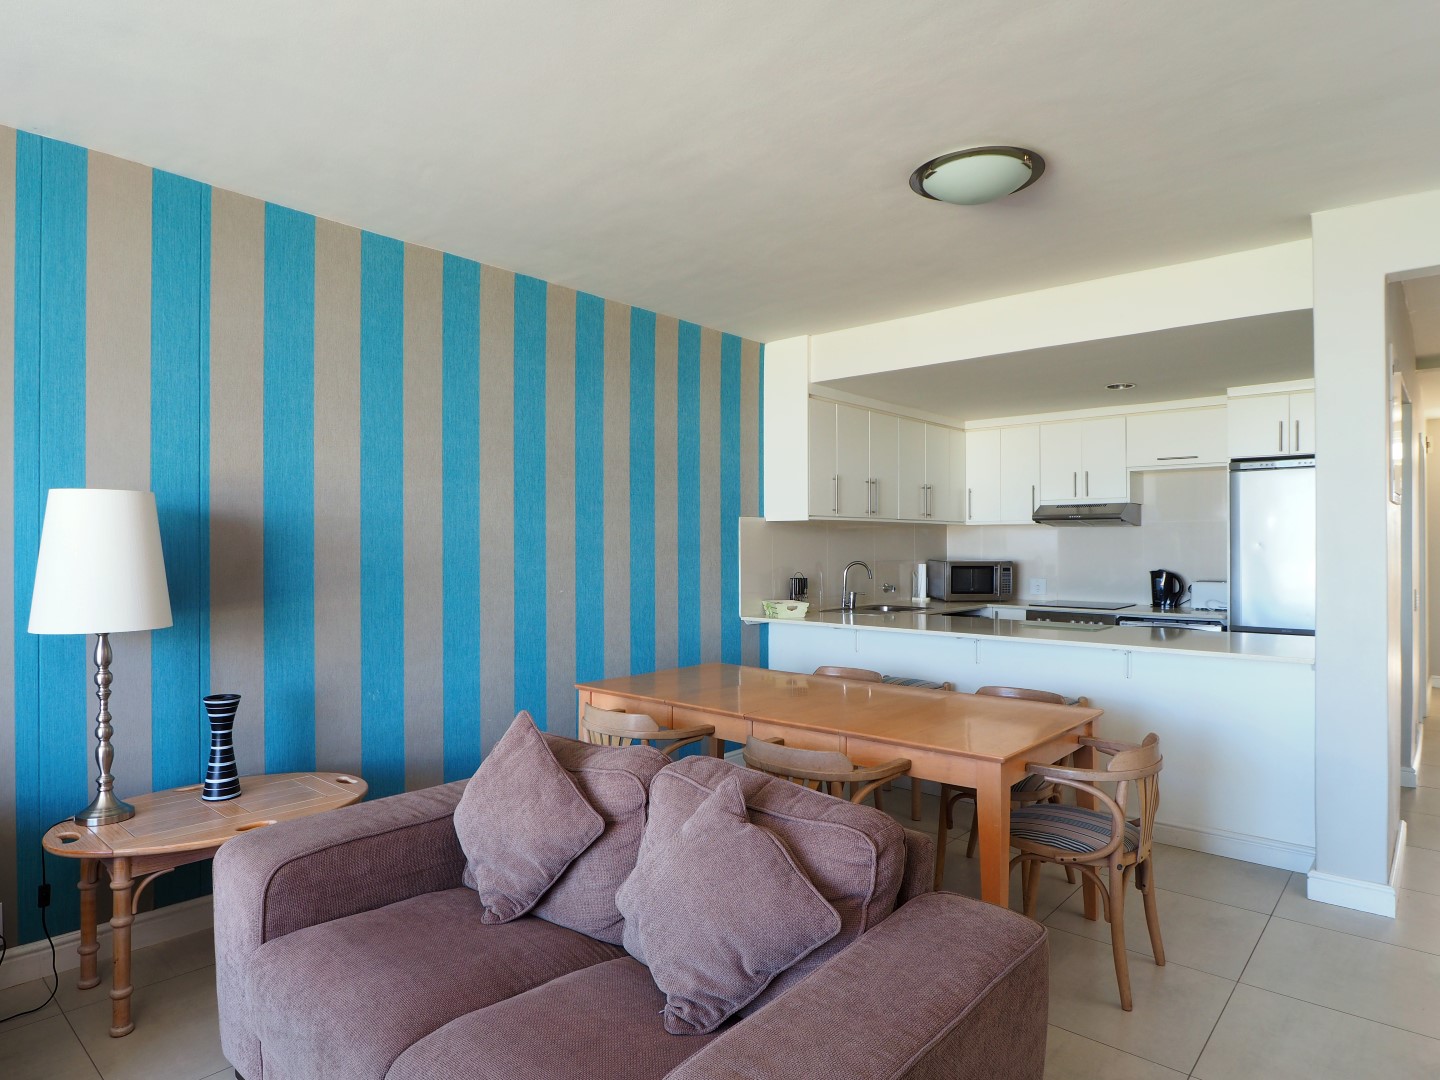 Photo 12 of Dolphin Beach Beauty accommodation in Bloubergstrand, Cape Town with 3 bedrooms and 2 bathrooms